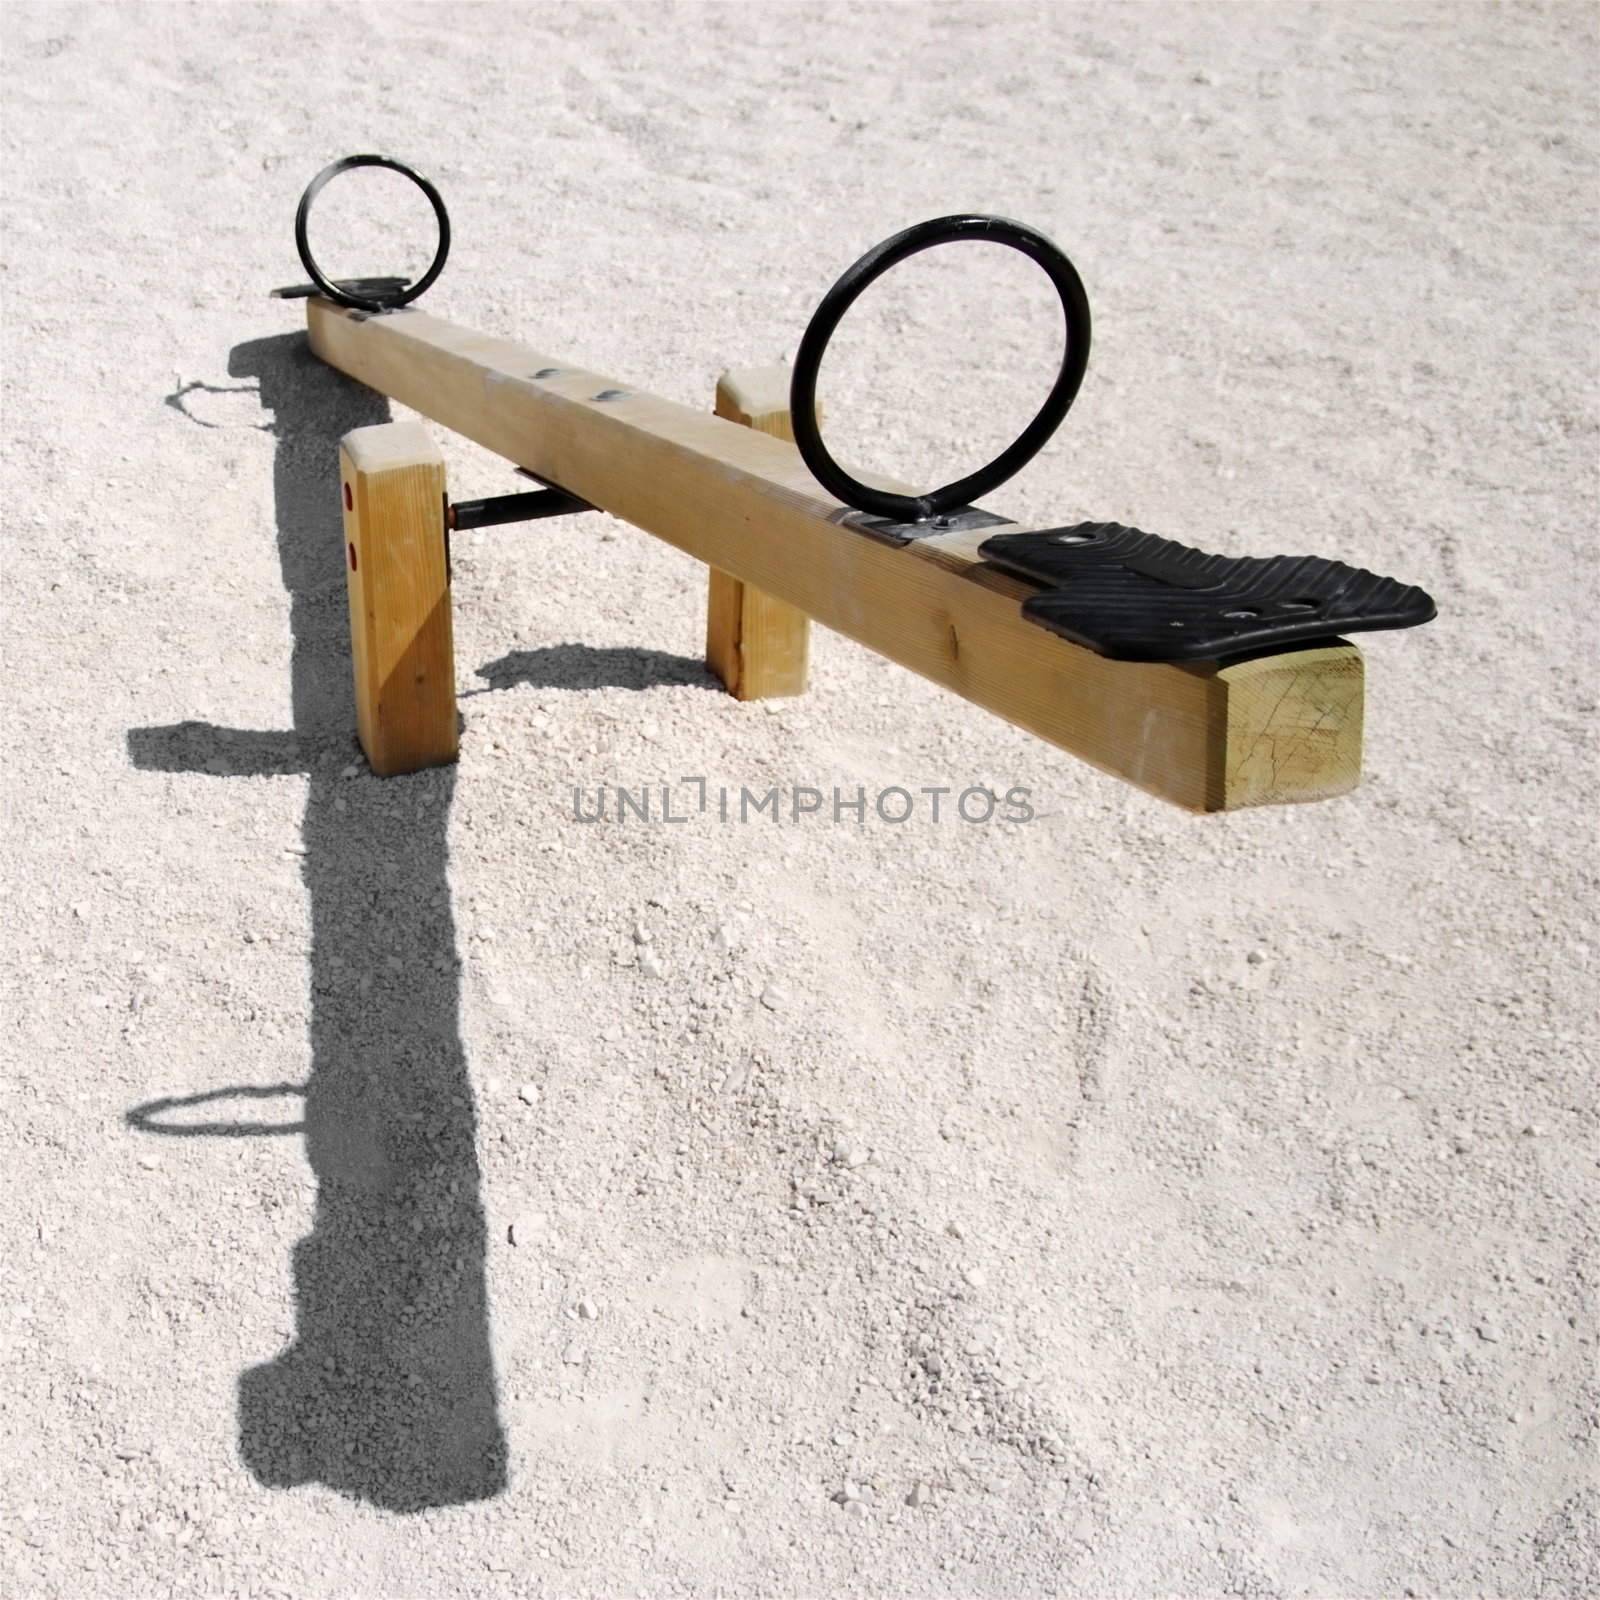 empty wooden teeter-totter or seesaw with shadow - negative natality concept